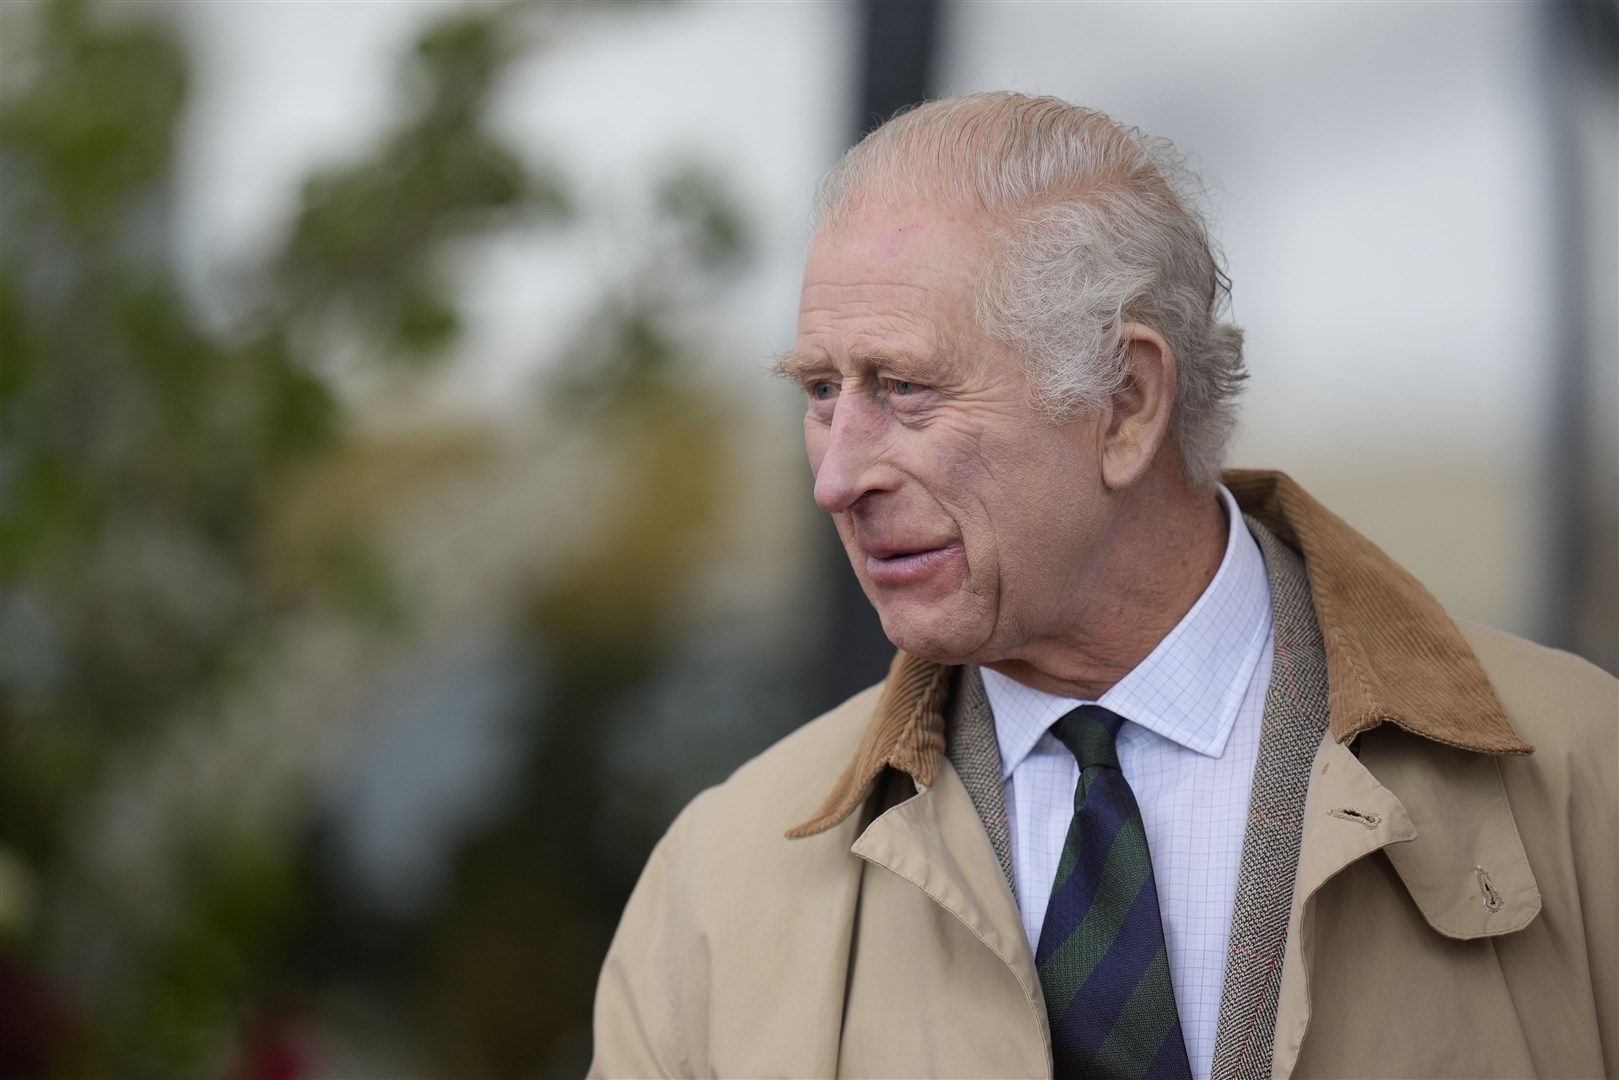 The King’s ‘full programme’ means there isn’t time for him to meet with Harry during his stay in the UK (Andrew Matthews/PA)